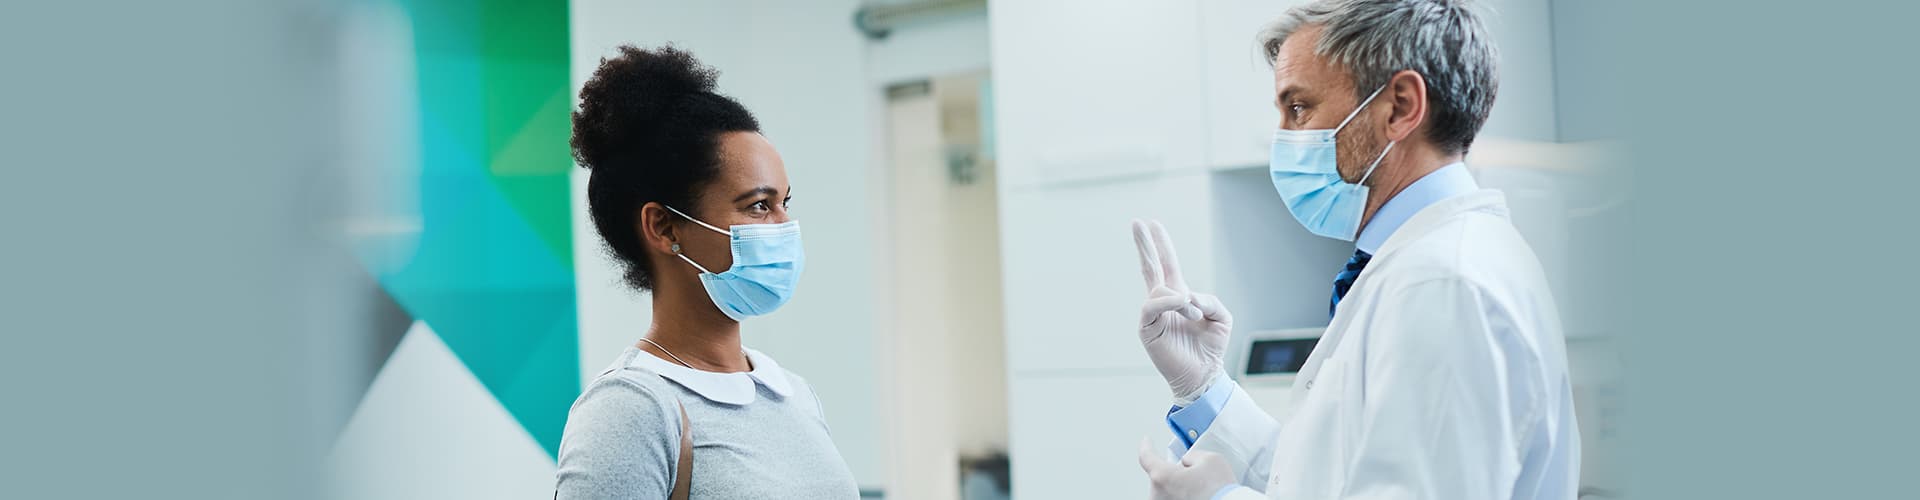 Masked dentist and patient talking while facing each other after Covid-19 protocol.